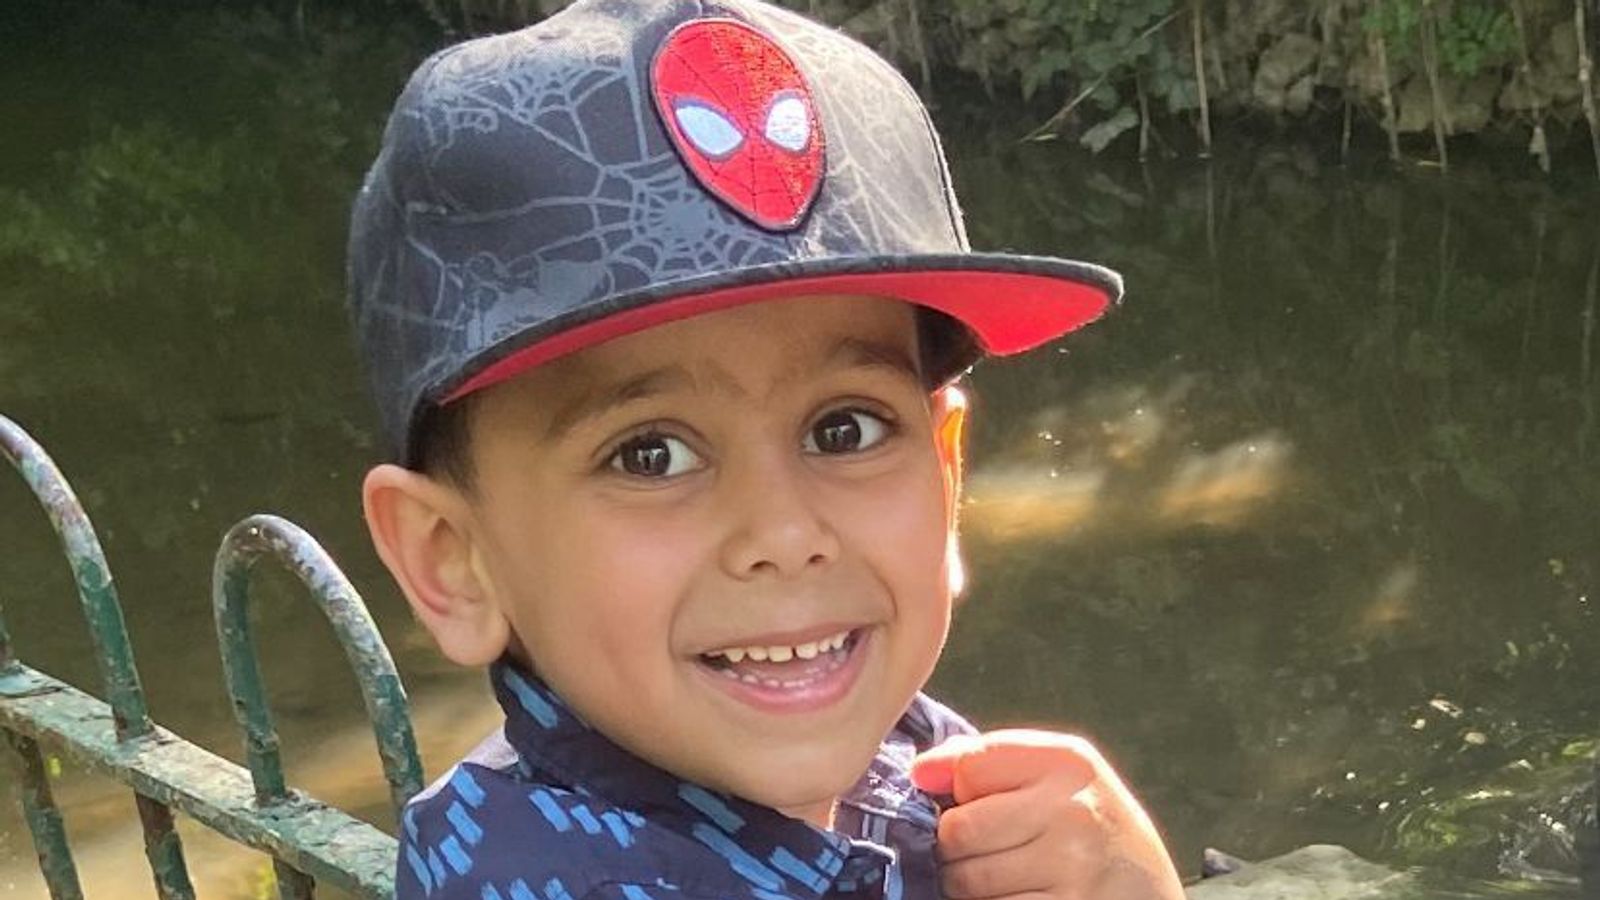 'They said they had no space': Family says boy, 5, died after he was sent home from hospital